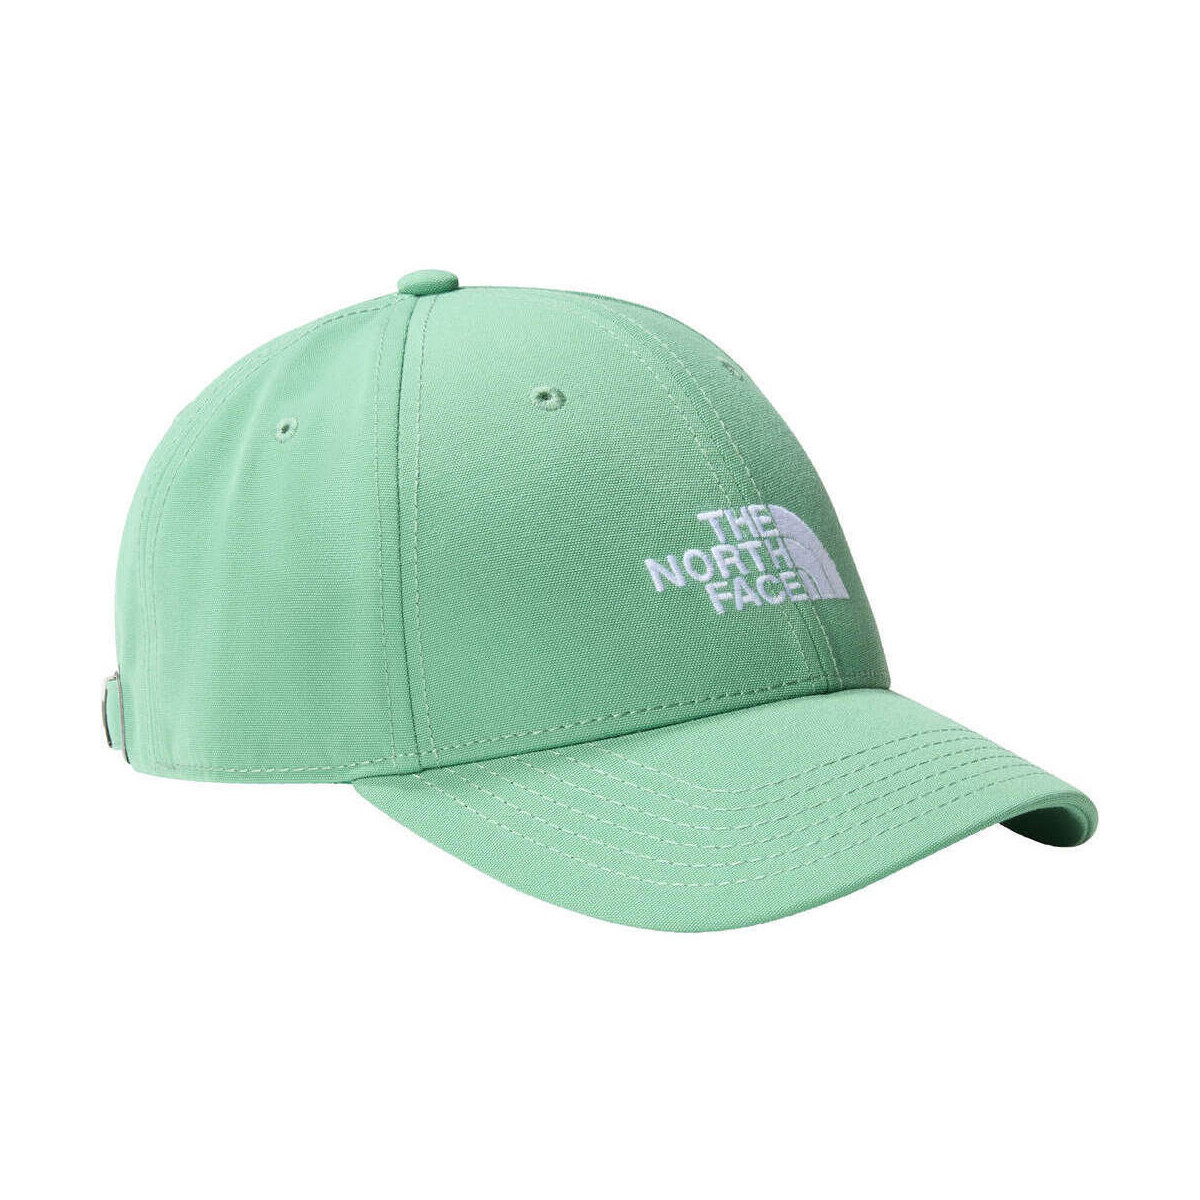 Accessoires textile Bonnets The North Face RECYCLED 66 CLASSIC HAT Vert